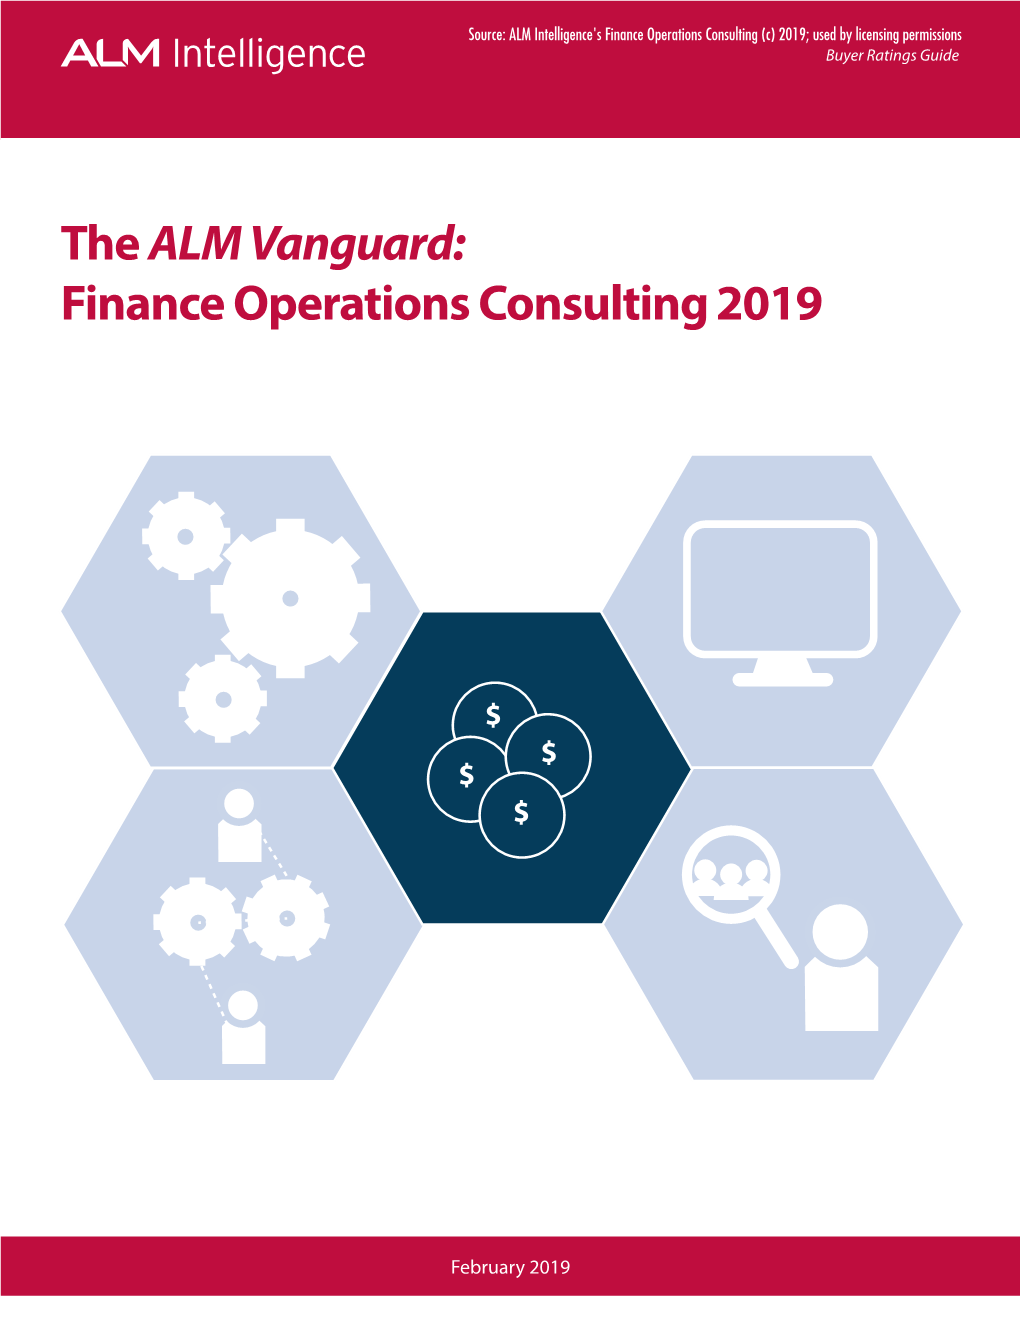 The ALM Vanguard: Finance Operations Consulting2019